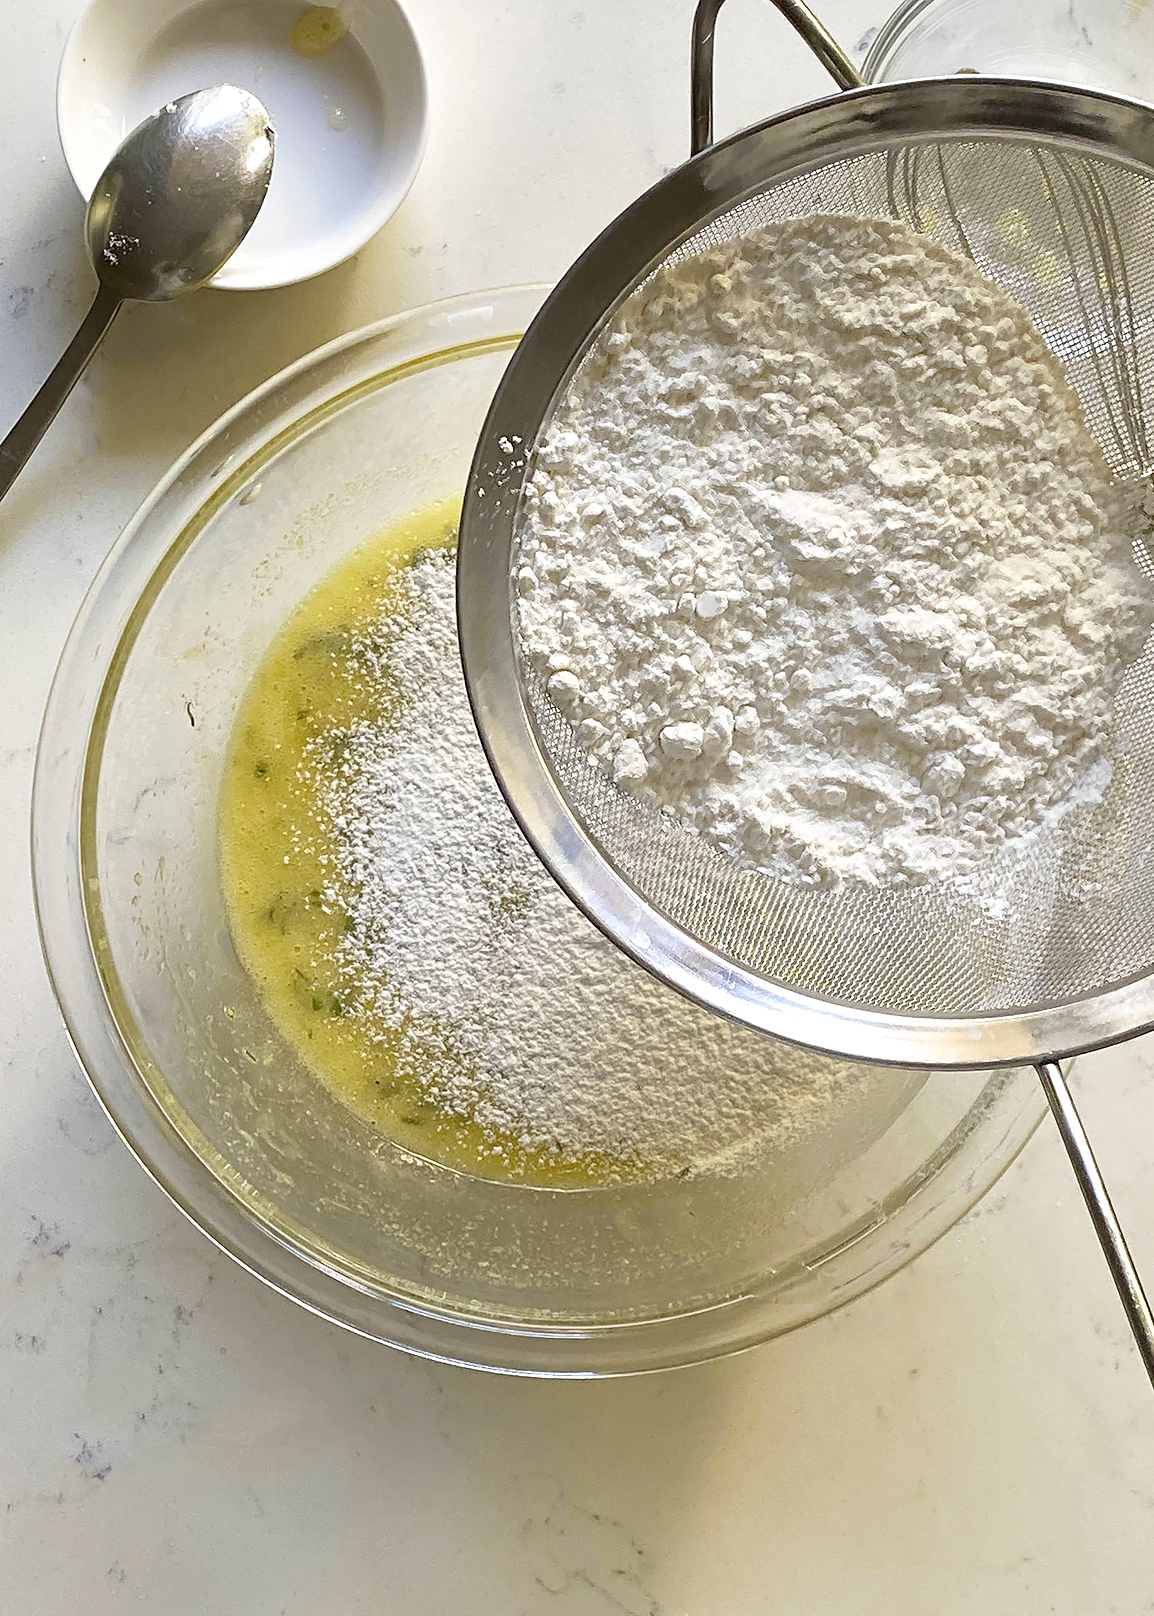 sifting dry flour ingredients into olive oil cake batter